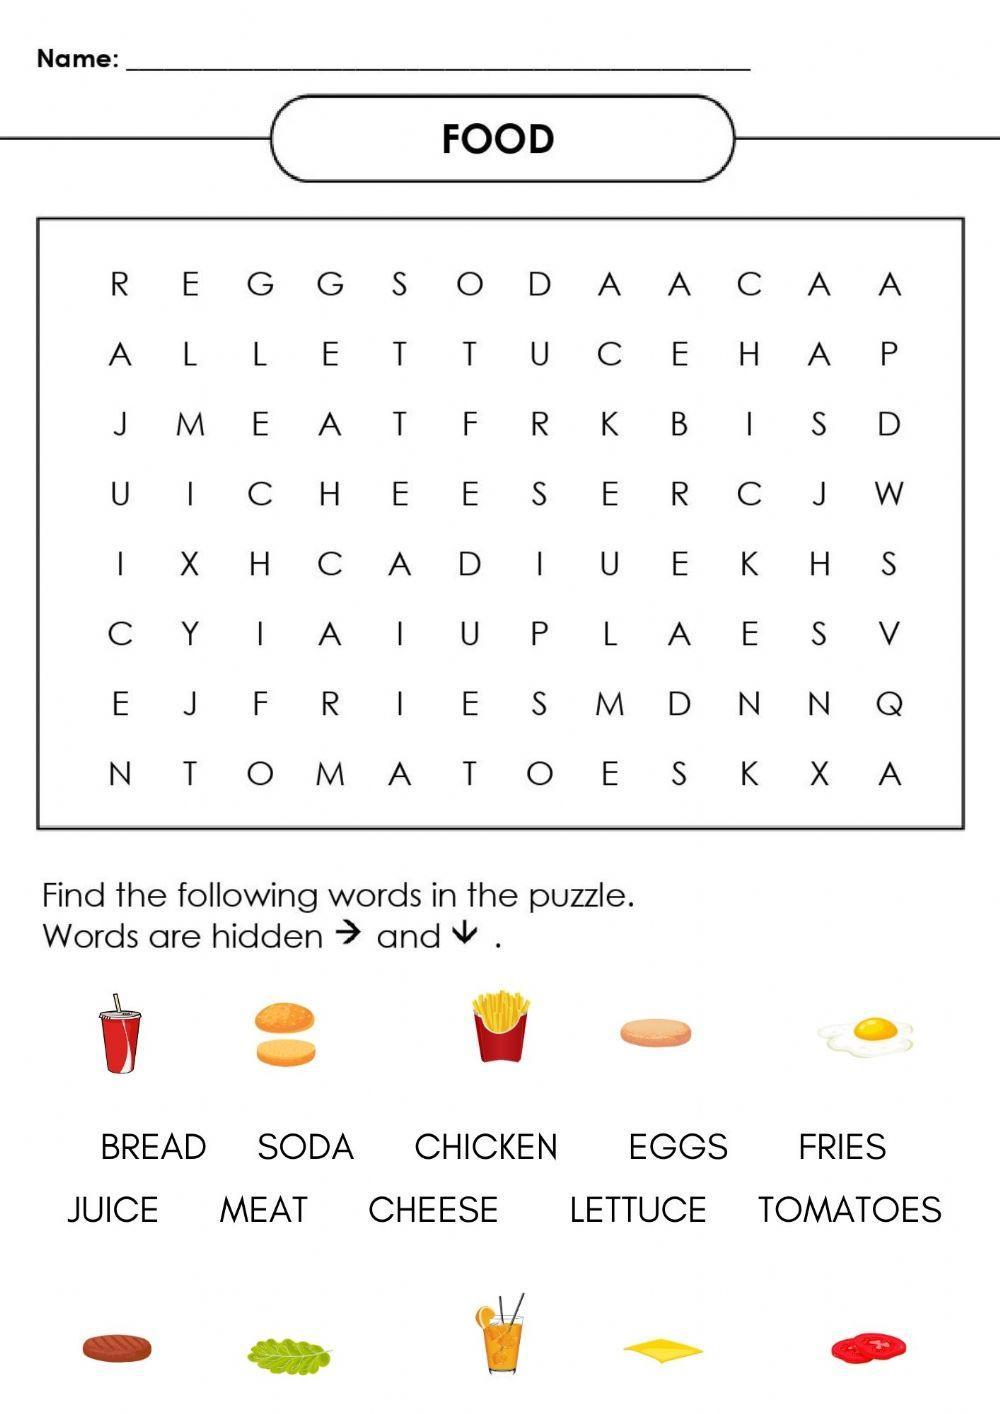 FOOD word search